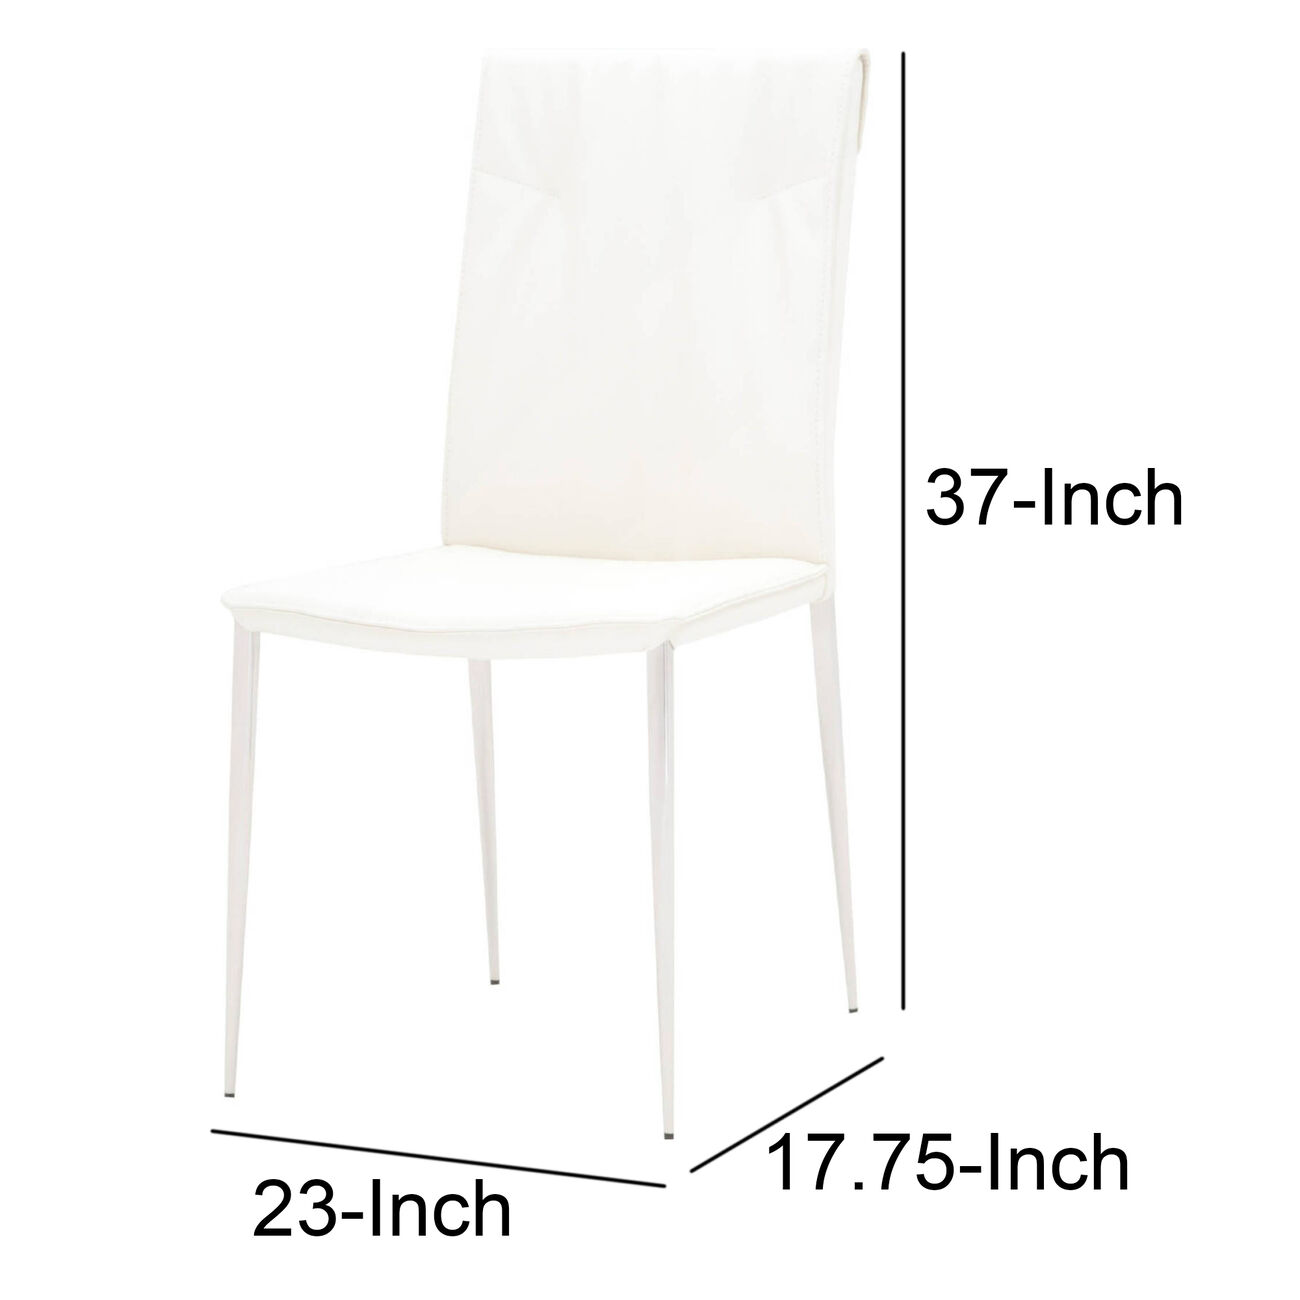 Leatherette Dining Chair with Slim Legs and Piped Edges, Set of 2, White